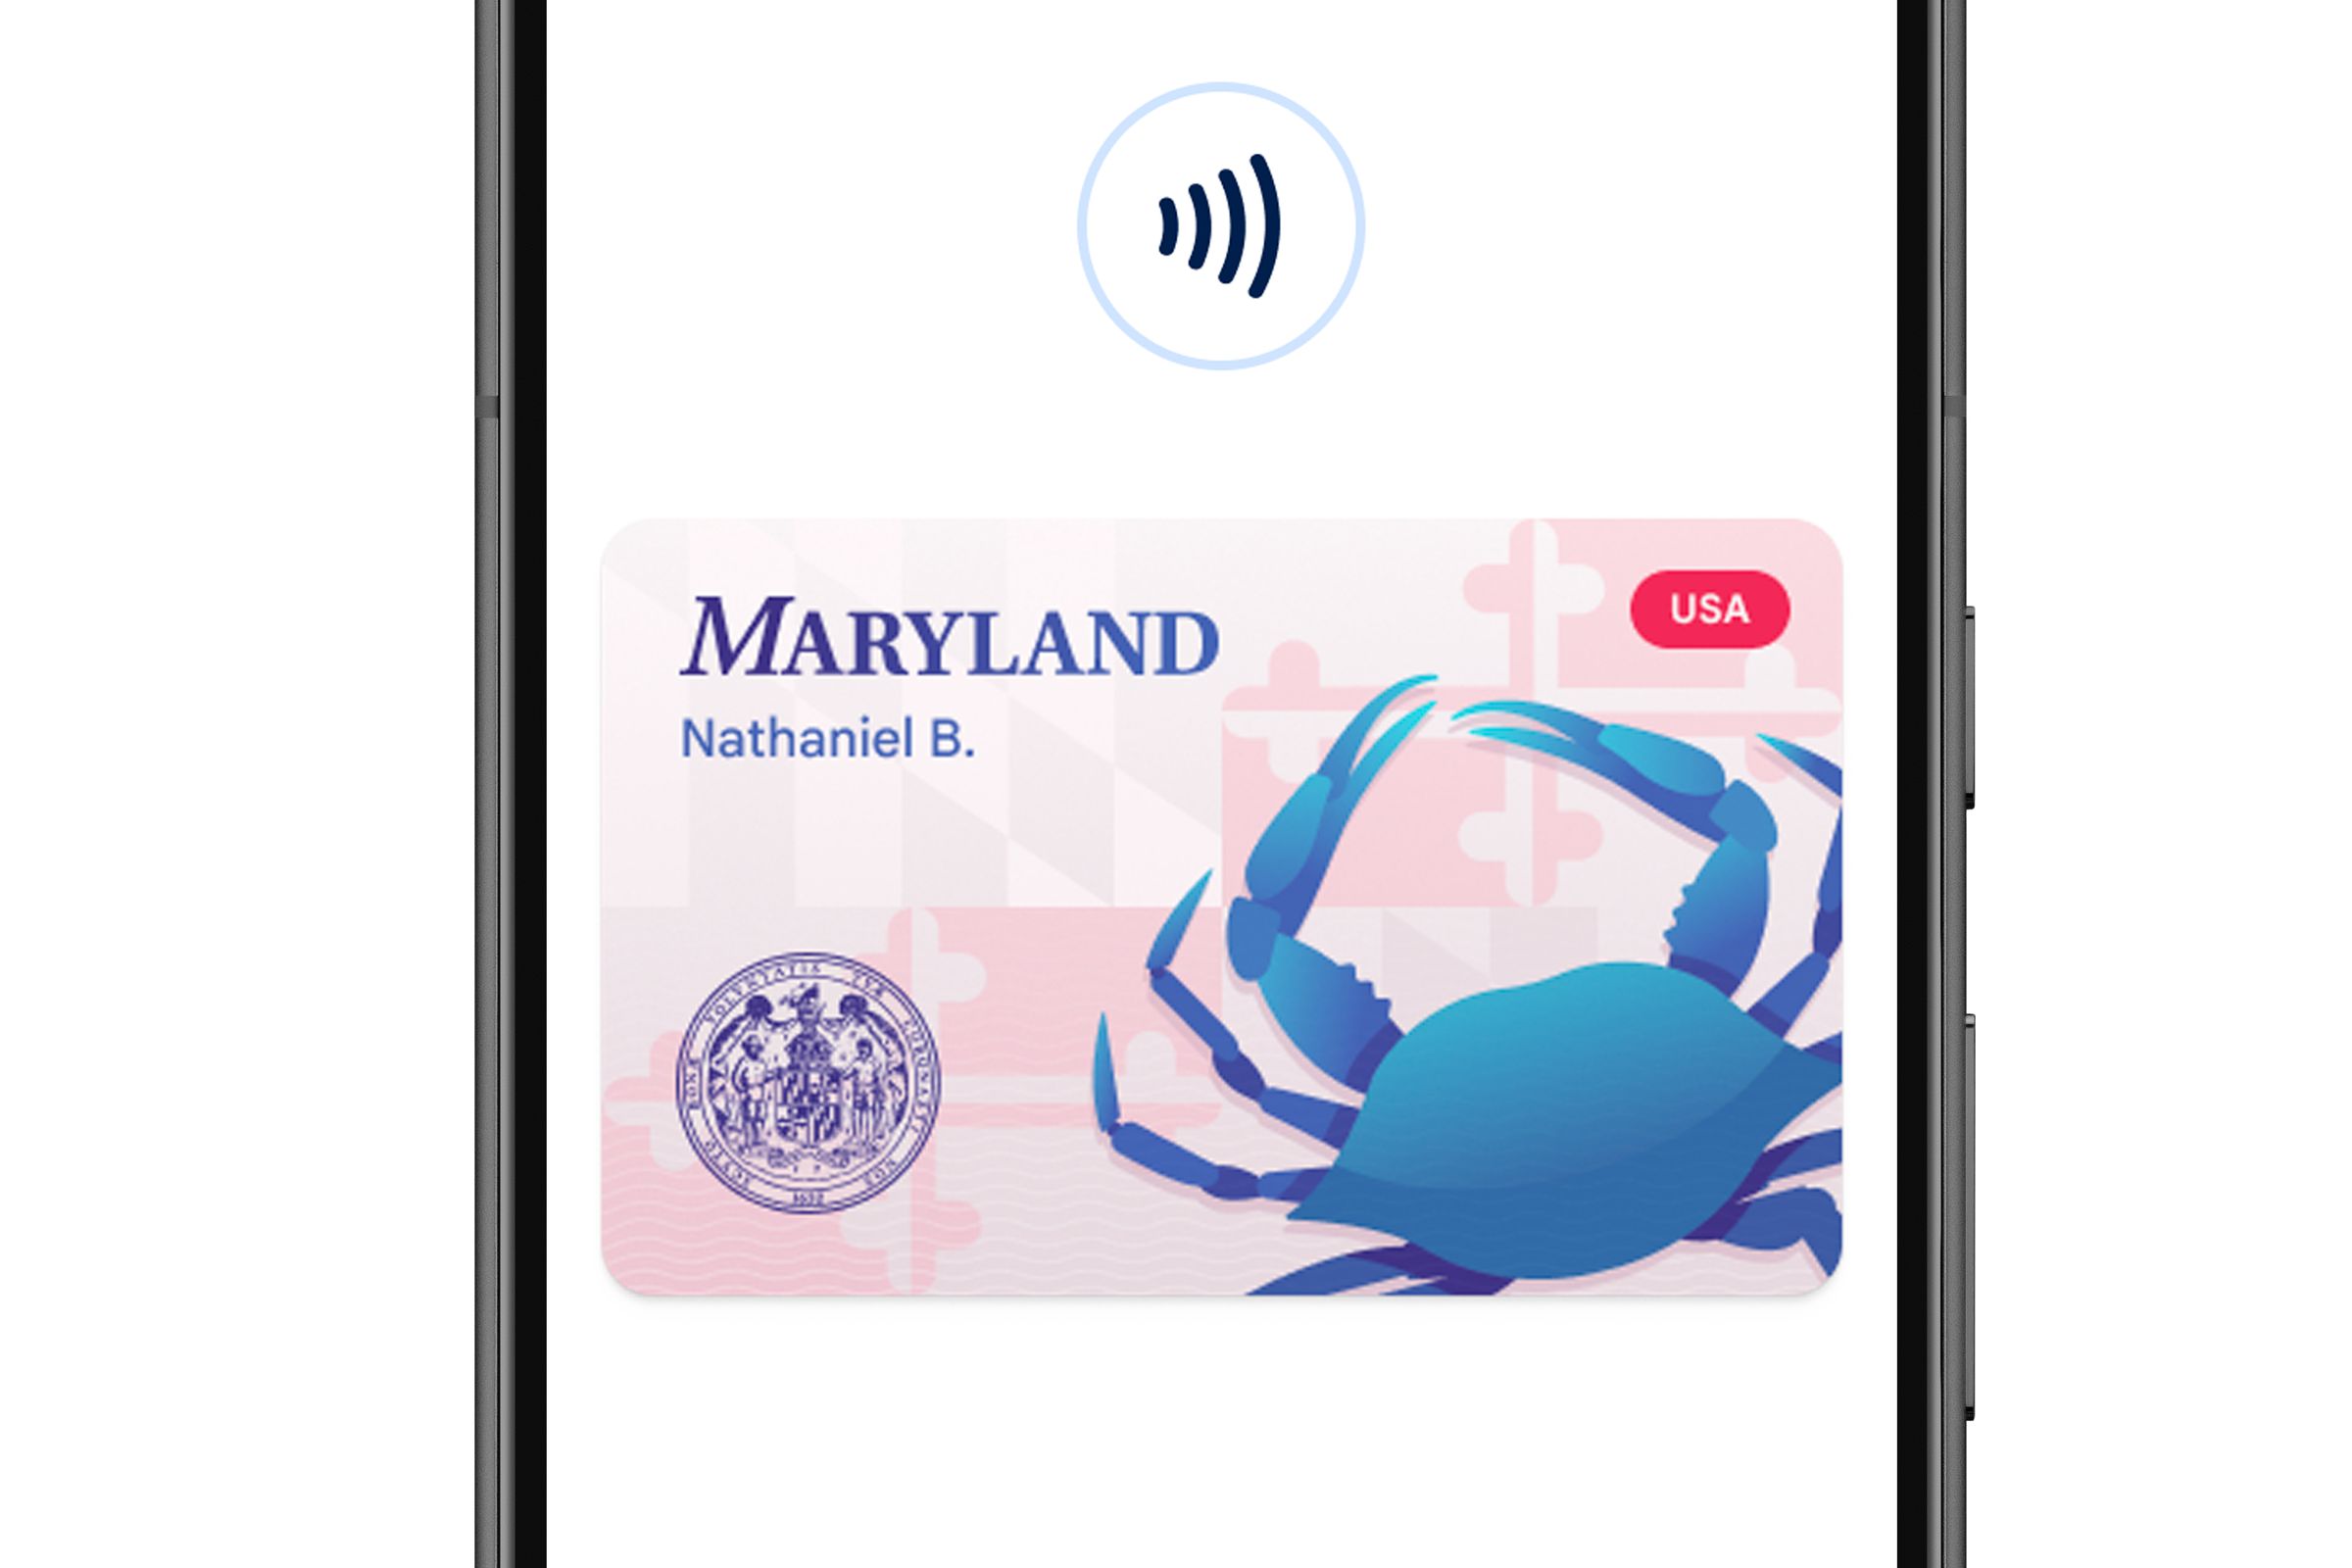 an image of an Android phone with a Maryland ID card image with a blue crab and flag in the back and a waves icon above it indicating to tap the phone to a terminal.